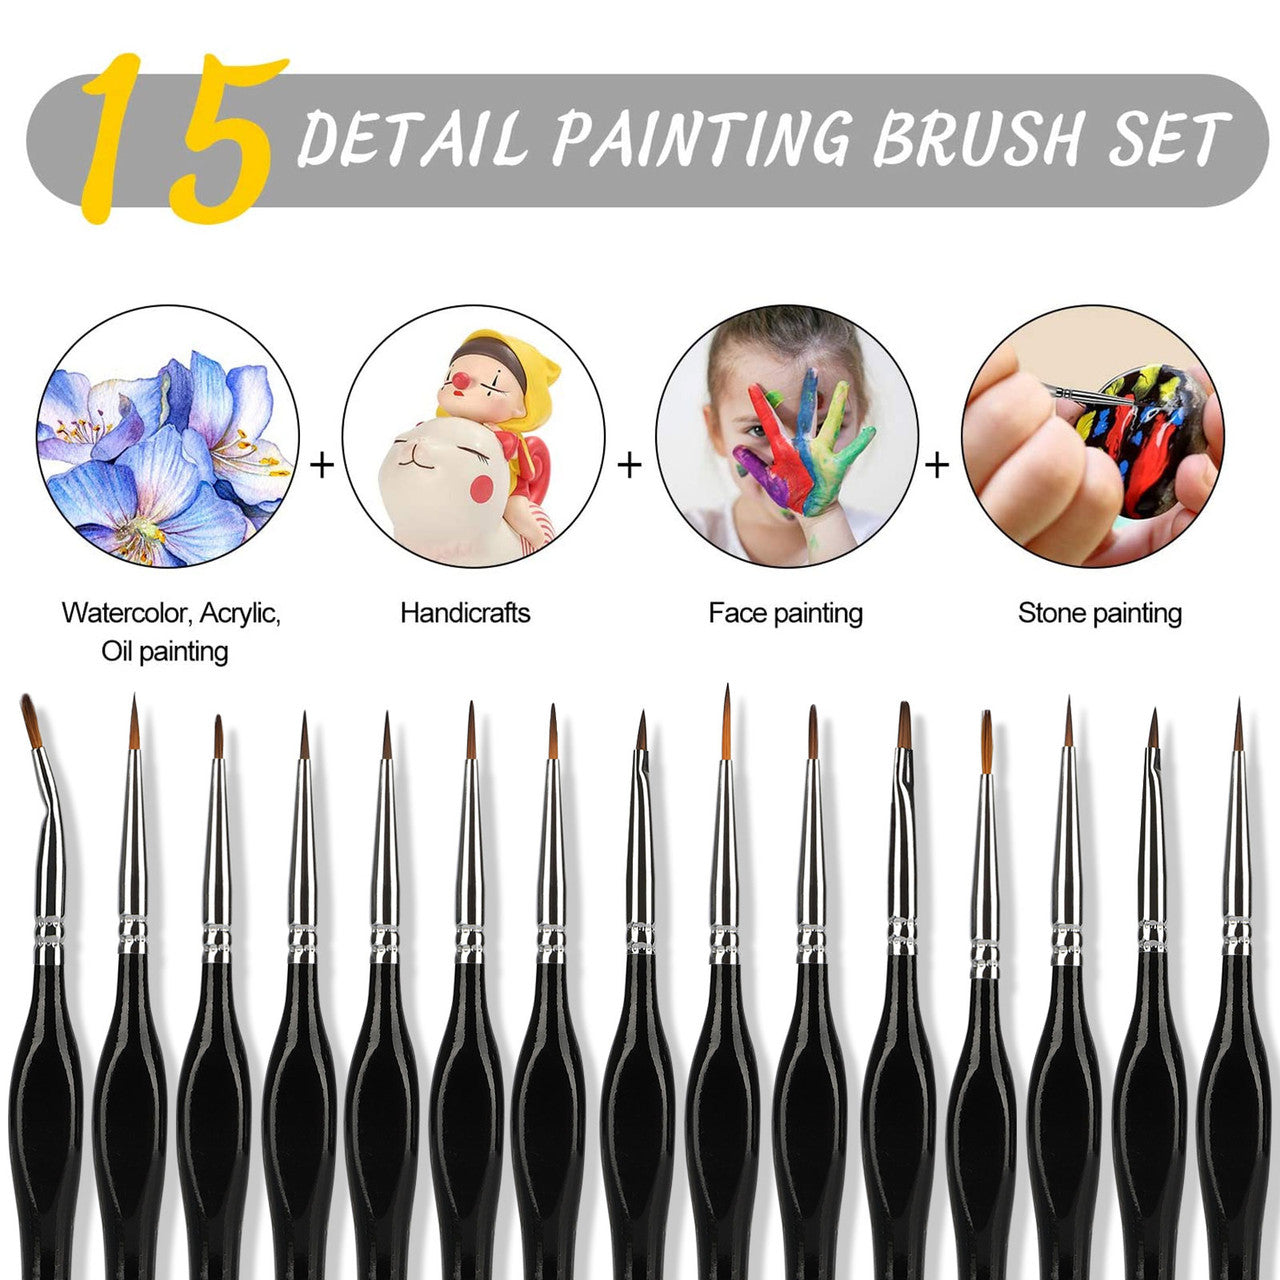 Fine Detail Paint Brush Set, 15pcs Tiny Professional Micro Miniature Painting Brushes Kit with Ergonomic Handle for Acrylic, Oil, Watercolor, Art, Scale Model, Face, Paint by Numbers